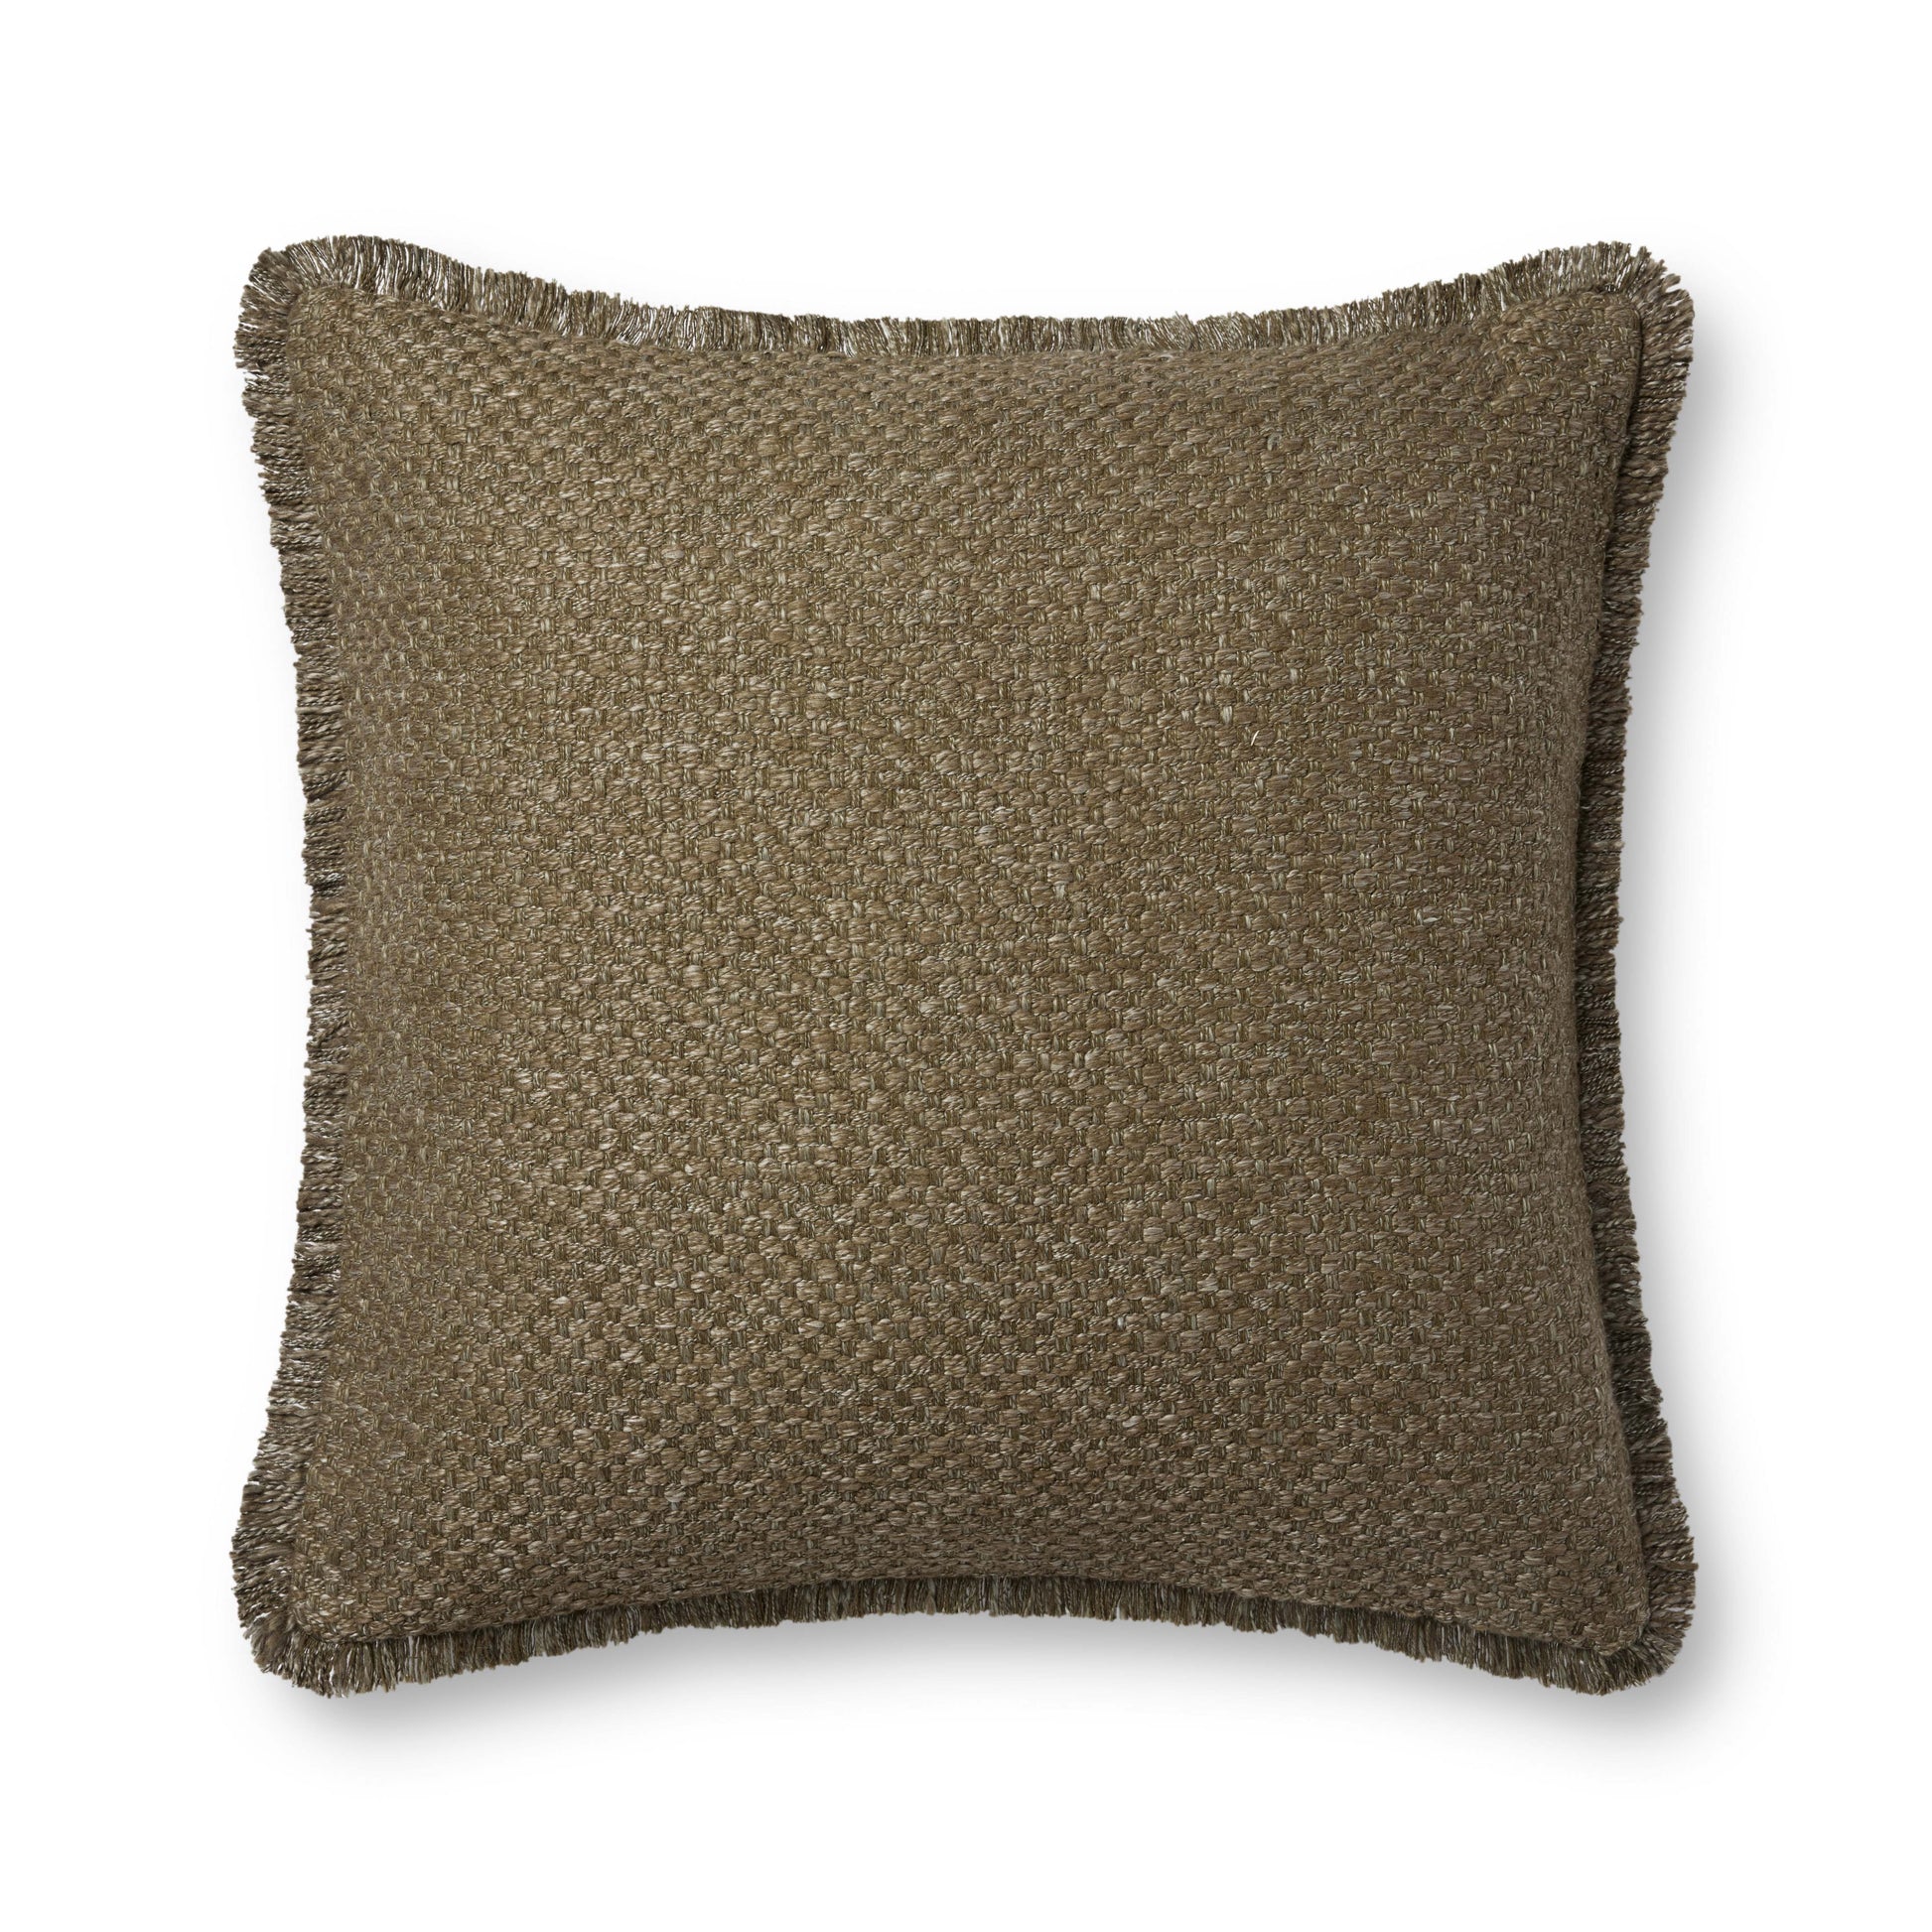 Photo of a pillow;  PLL0121 Olive 22'' x 22'' Cover w/Poly Pillow